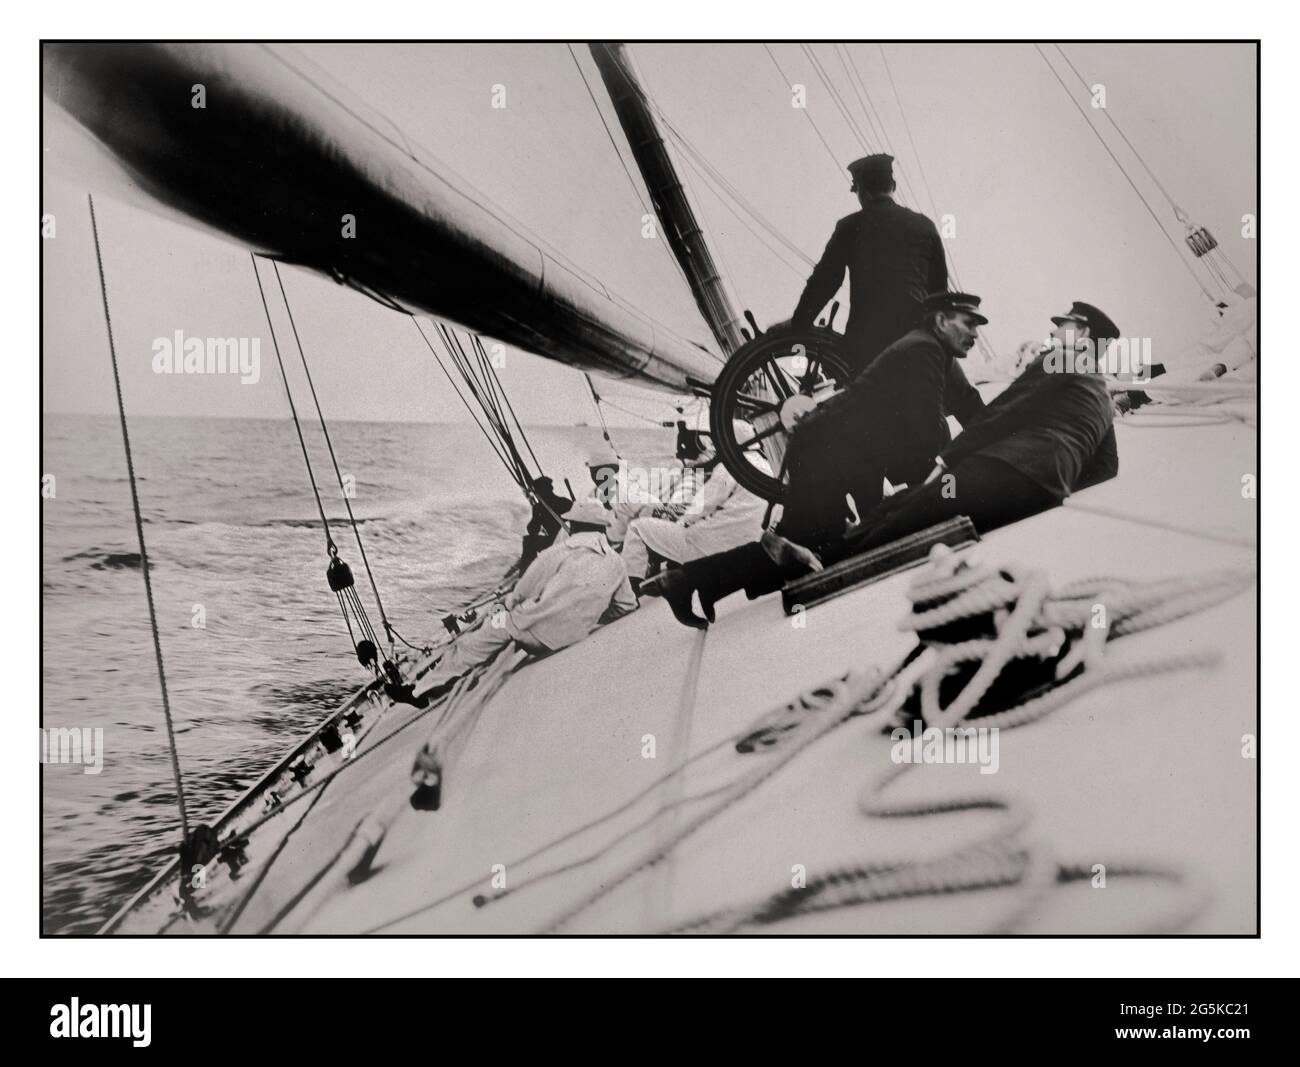 AMERICAS CUP WINNER 1903  crew lying on tilting deck of the yacht Reliance, winner of 1903 America's Cup Photograph shows gaff cutter designed by Nathanael Greene Herreshoff and built by Herreshoff Manufacturing Company, Bristol, Rhode Island, for the 1903 America's Cup. Burton, James, photographer [1903] -  Reliance (Yacht)--1900-1910 -  America's Cup--(12th :--1903 :--New York, N.Y.)--Equipment & supplies -  Sailboats--American--1900-1910-  Yachts--American--1900-1910  Sailing--1900-1910 Stock Photo